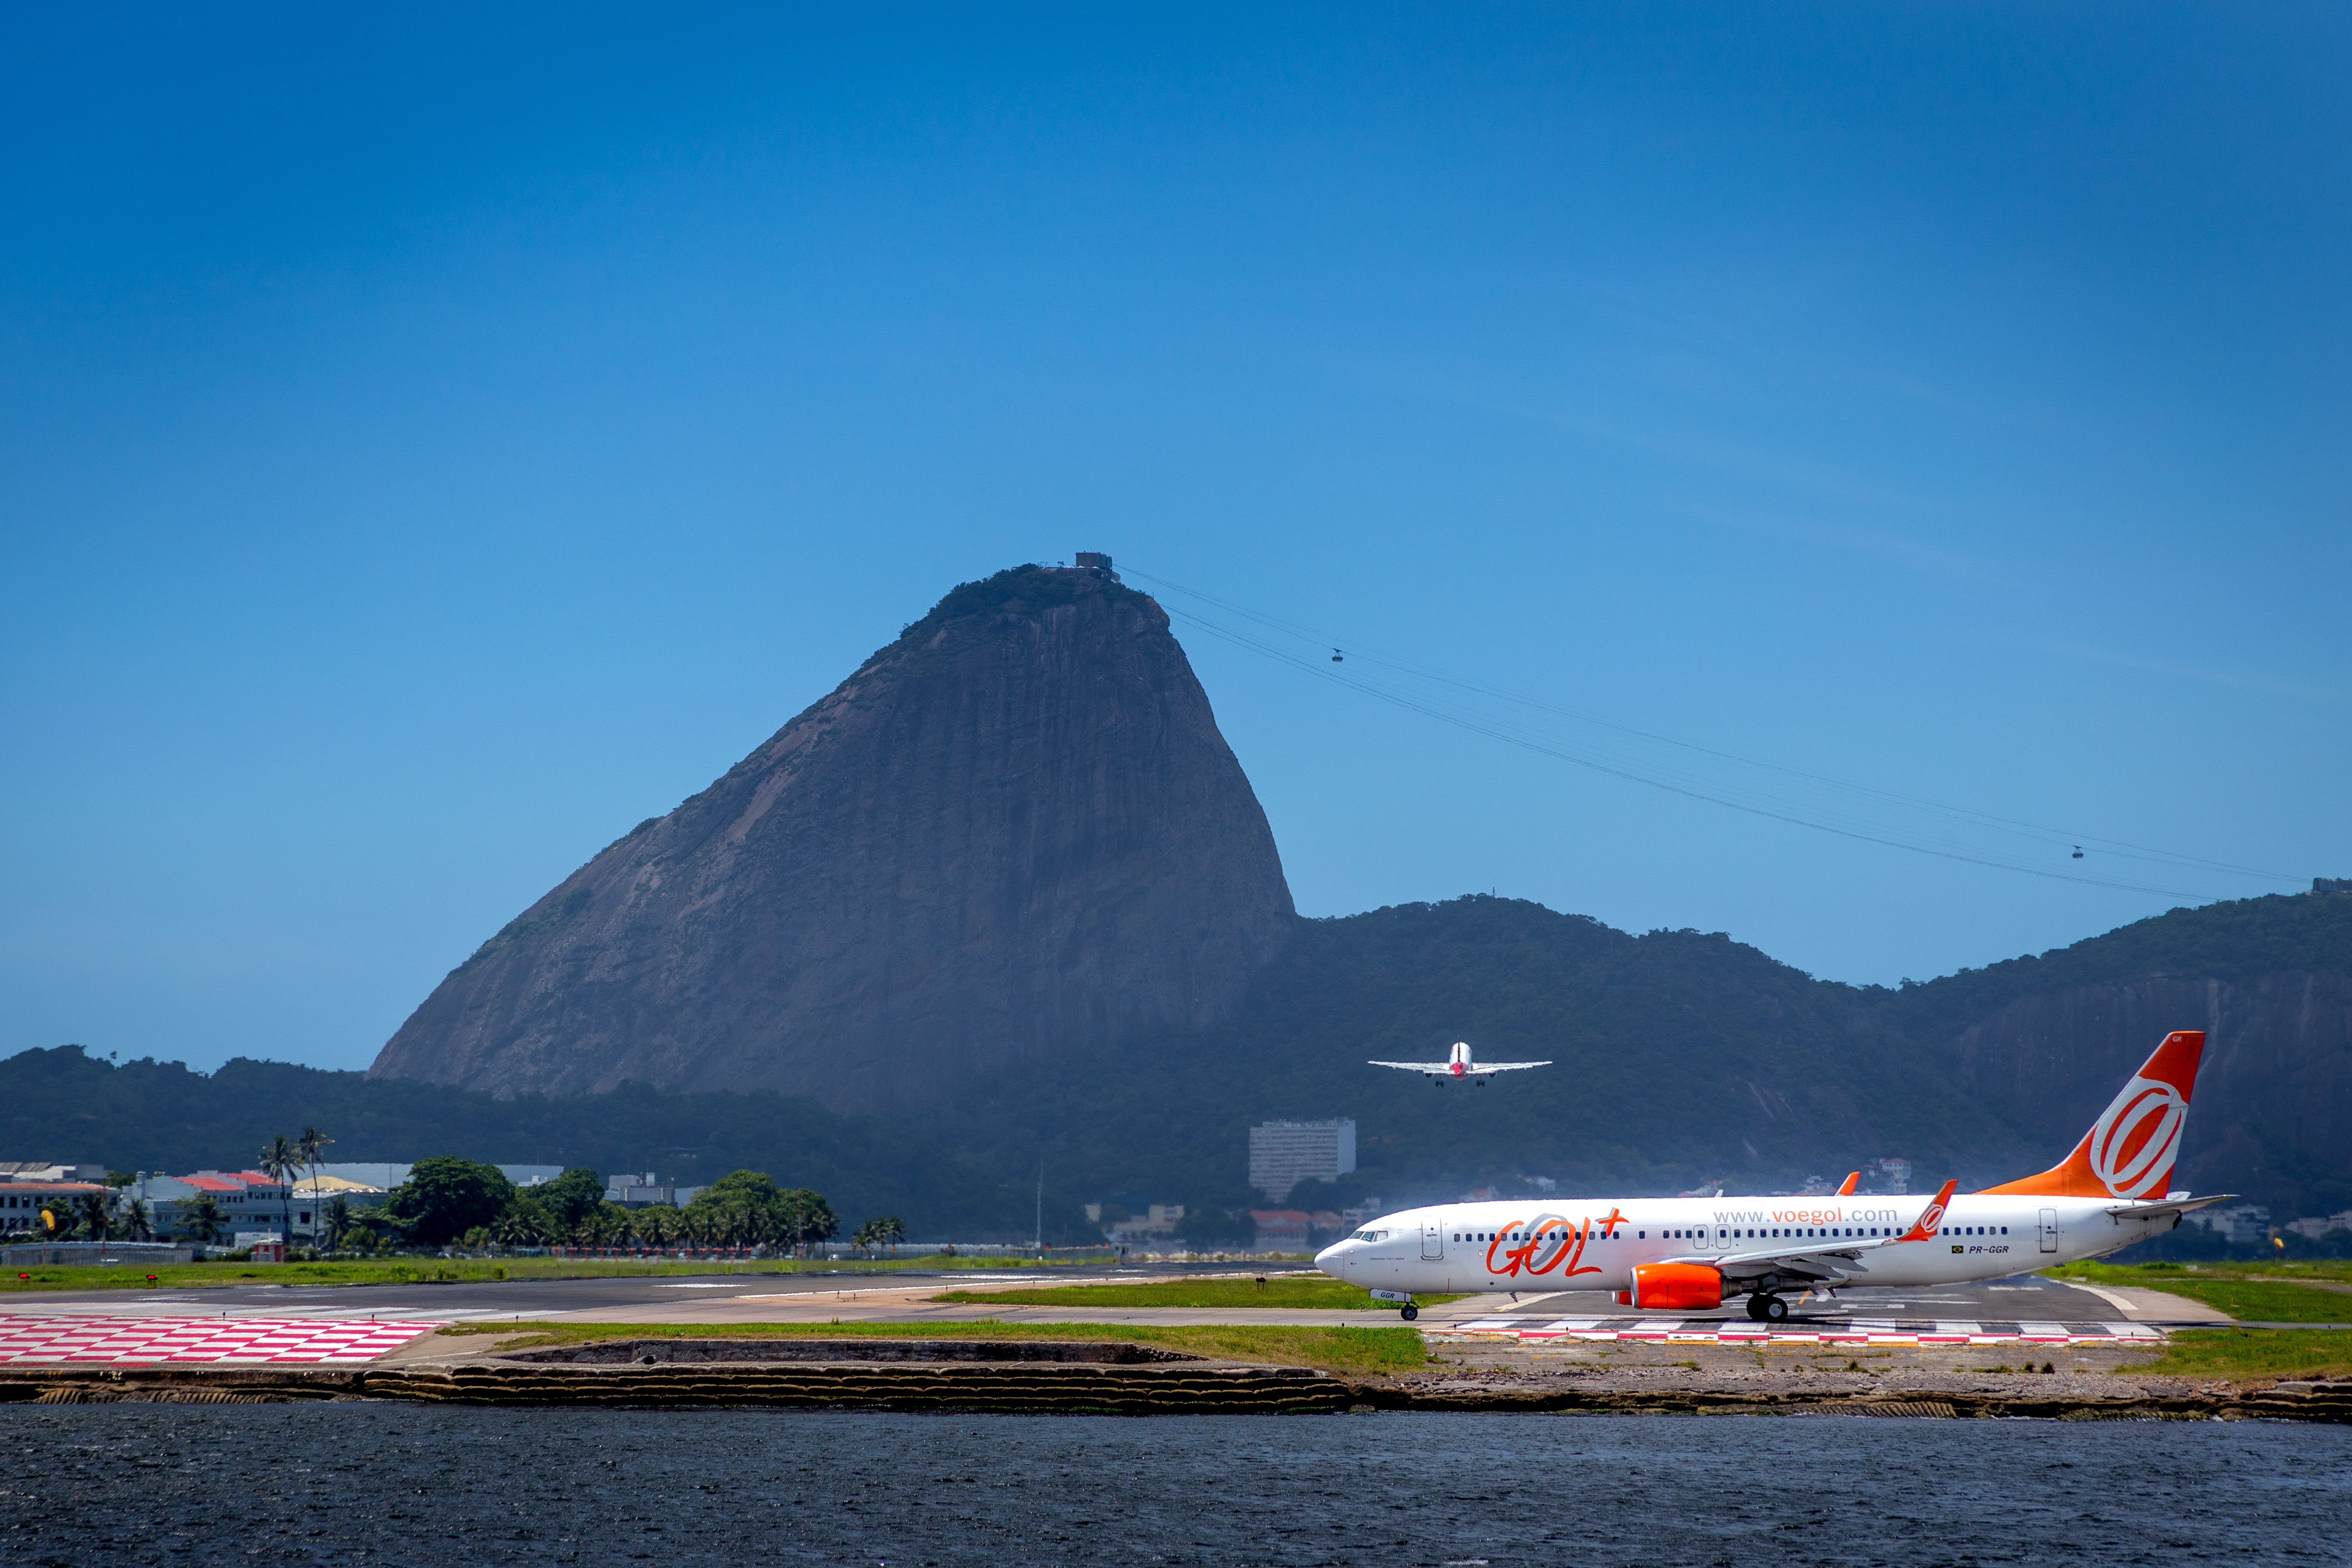 A GOL airplane at Rio de Janeiro Brazil Santos Dumont Airport runway, overlooking the Sugar Loaf.